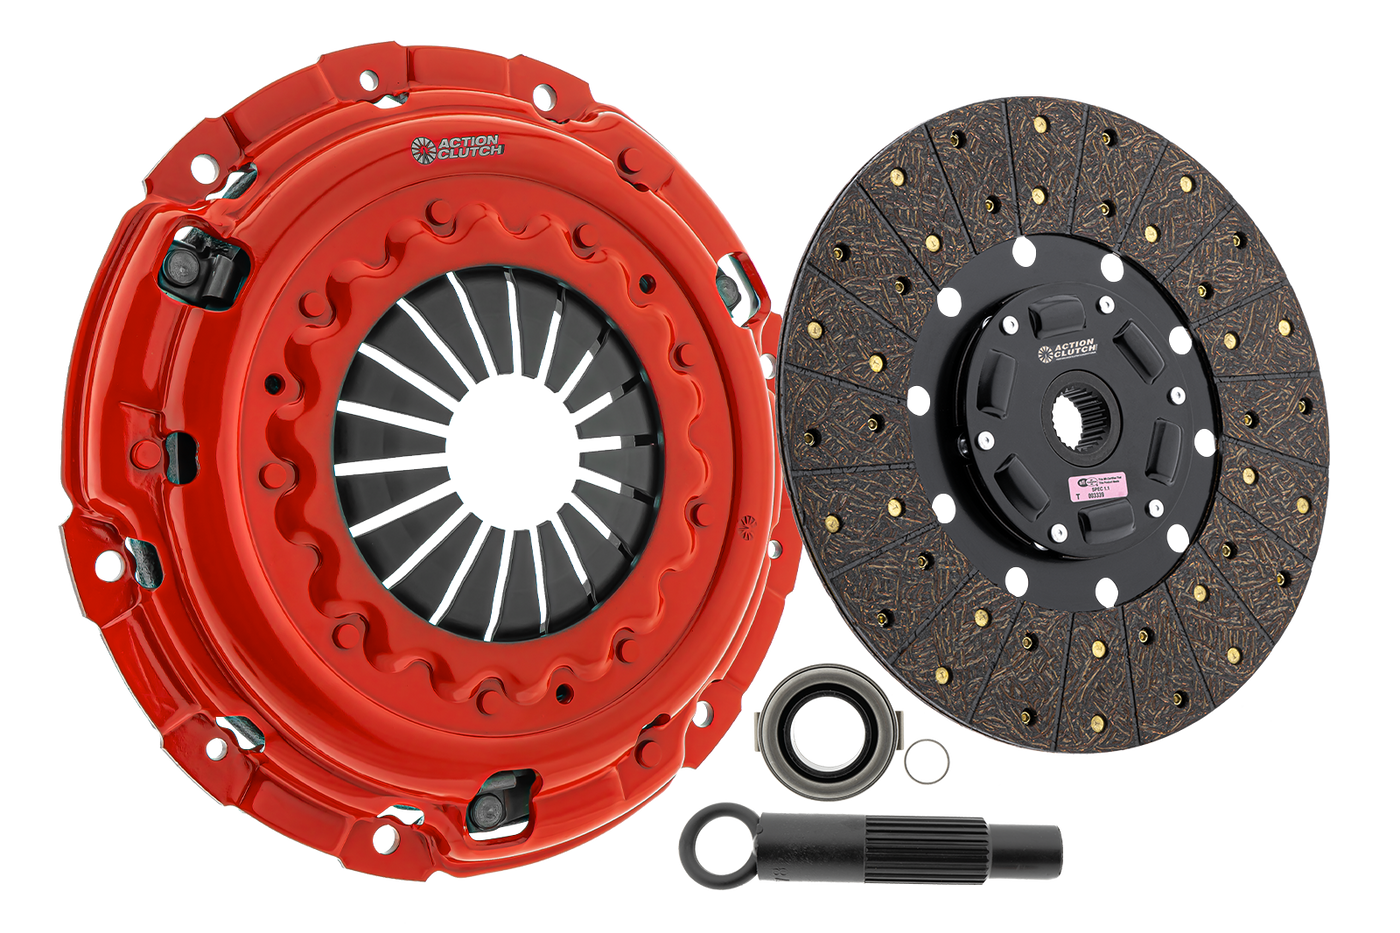 Stage 1 Clutch Kit (1OS) for Pontiac GTO 2004 5.7L (LS1) Without Slave and Release Bearing